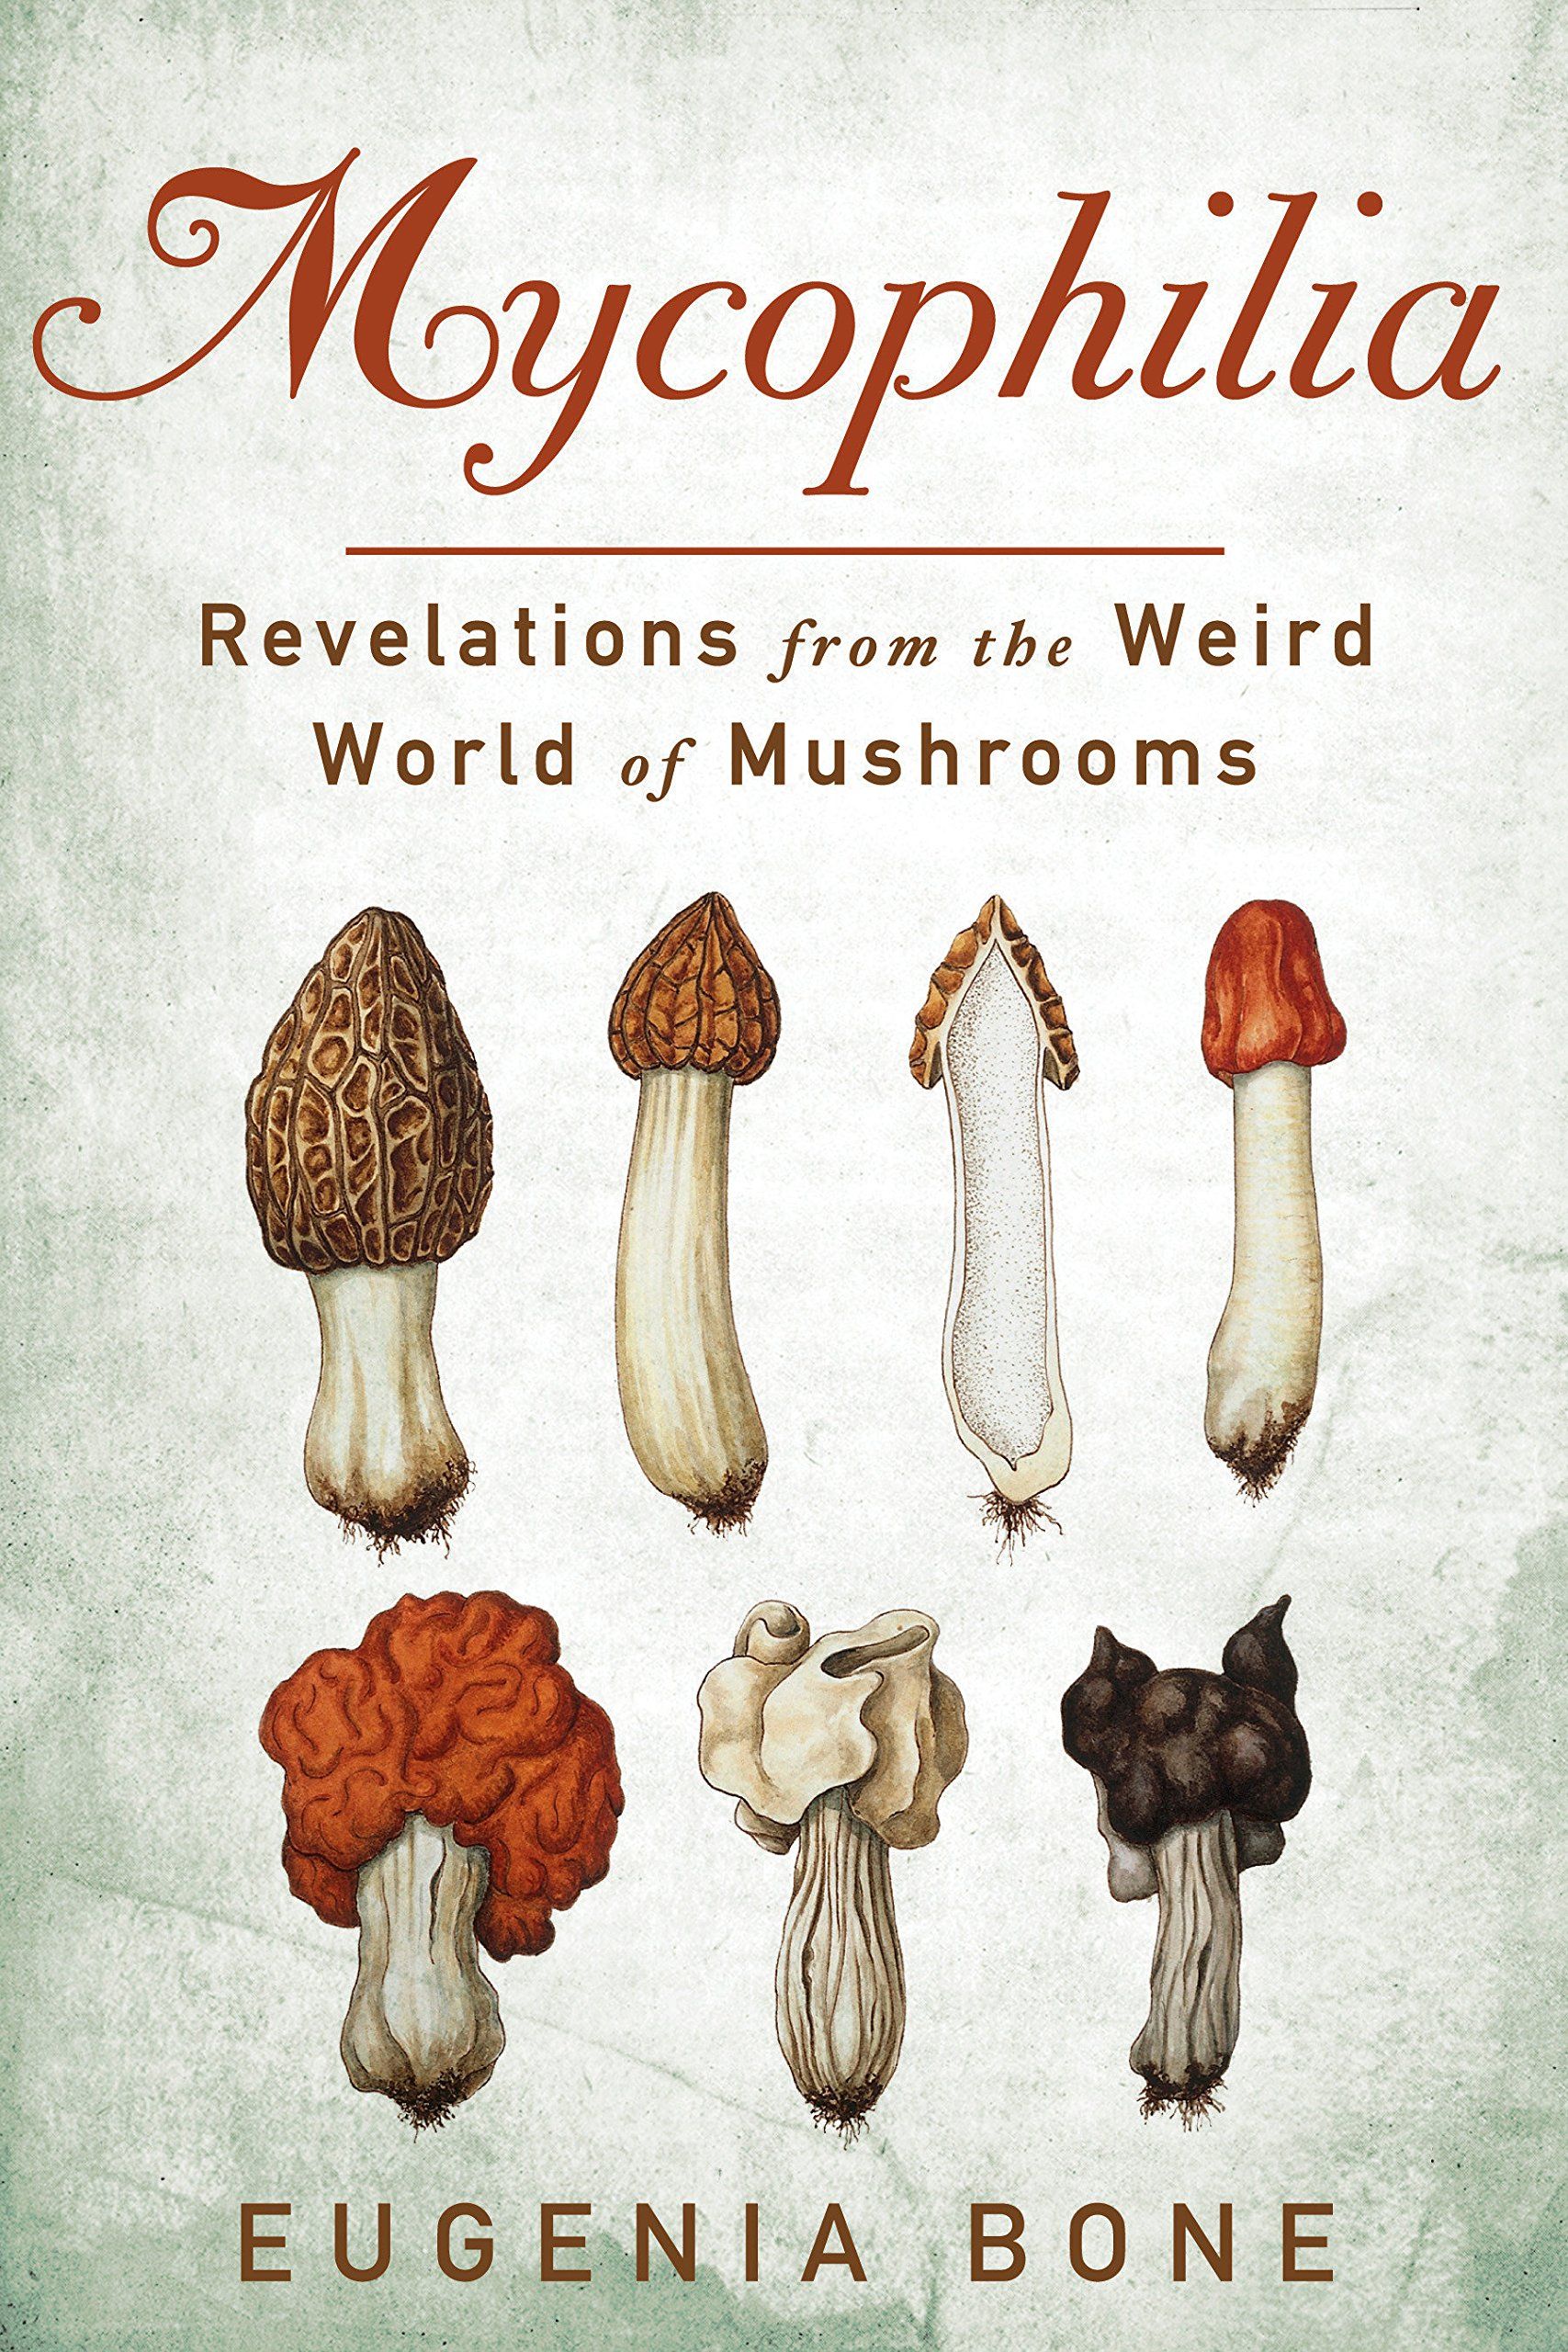 Mycophilia: Revelations from the Weird World of Mushrooms book cover